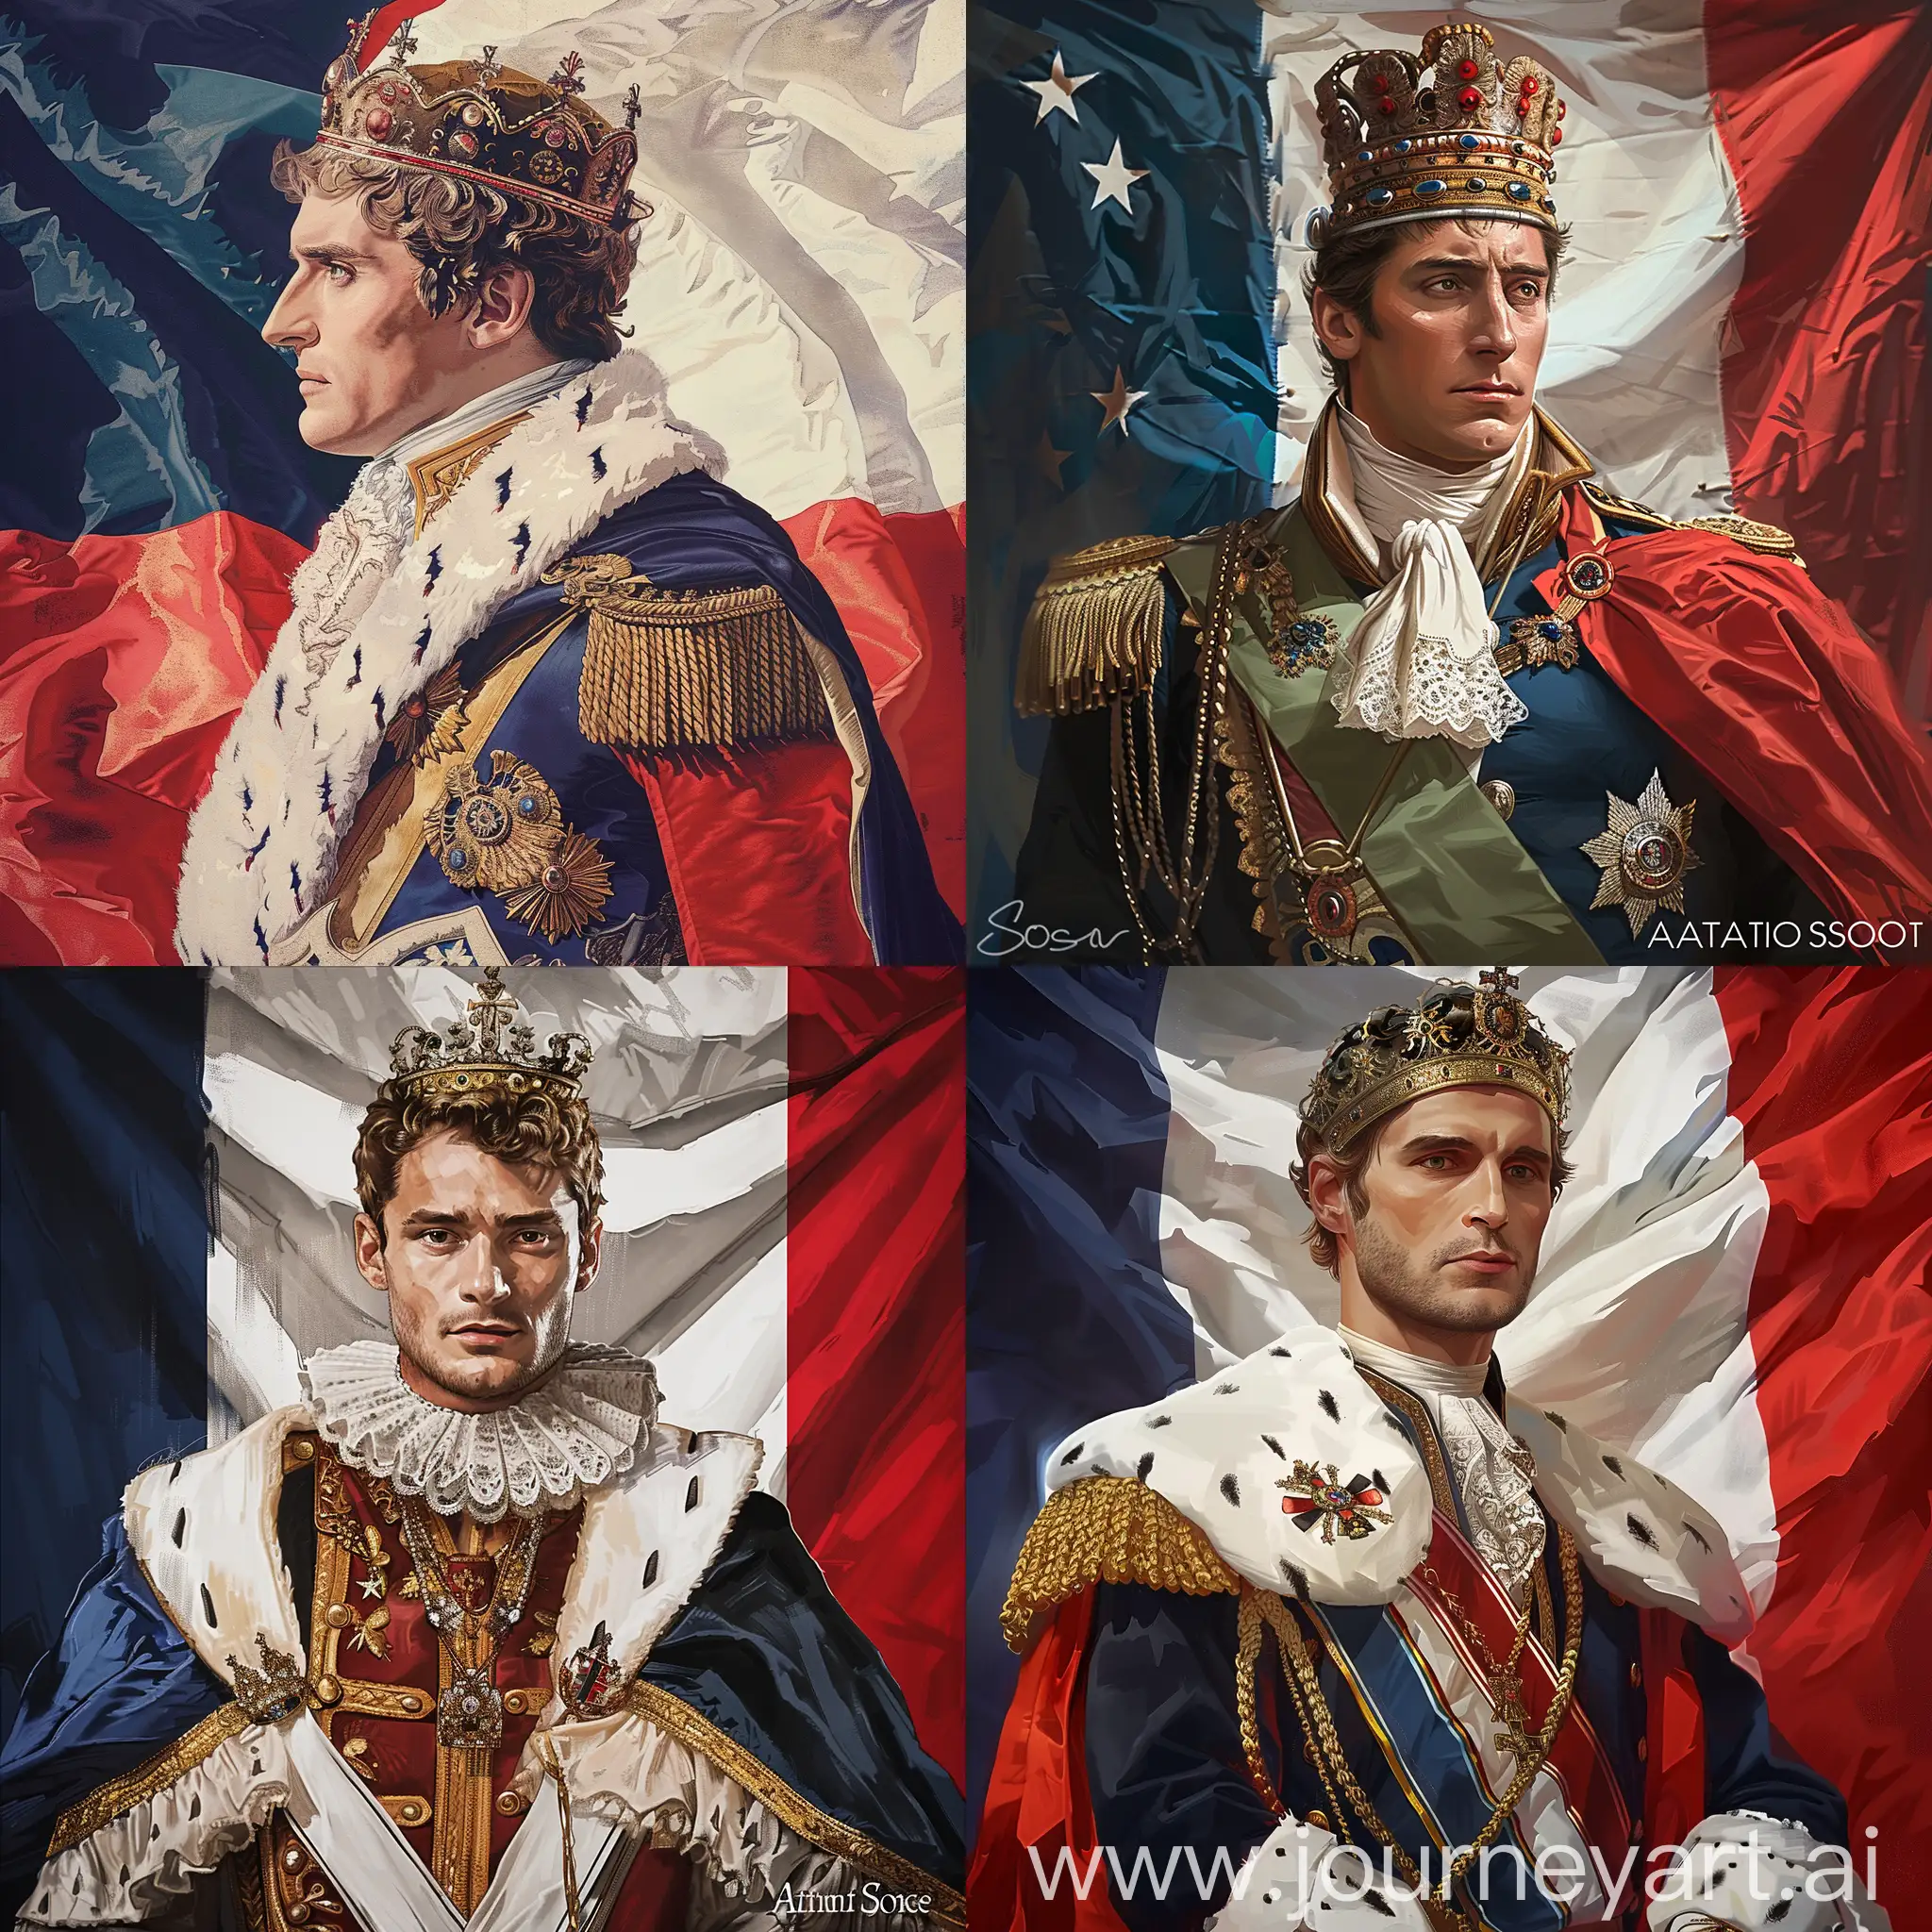 Illustration of Napoleon Bonaparte, depicted in his royal attire, historical accuracy, France flag background, art, illustration by Antonio Soares